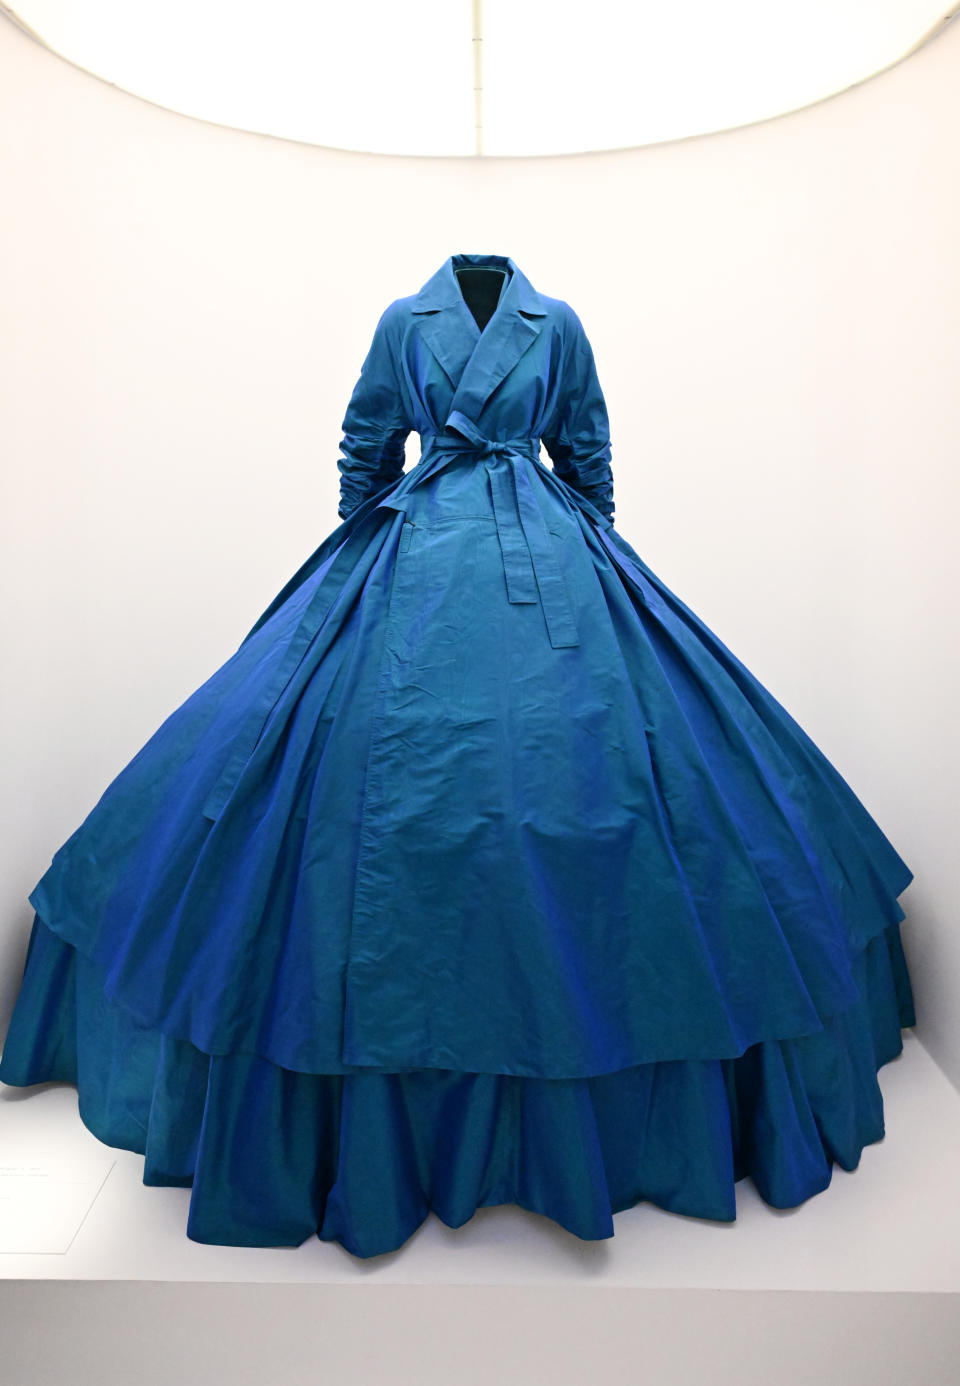 Elegant blue gown displayed on a mannequin with a voluminous skirt and fitted bodice